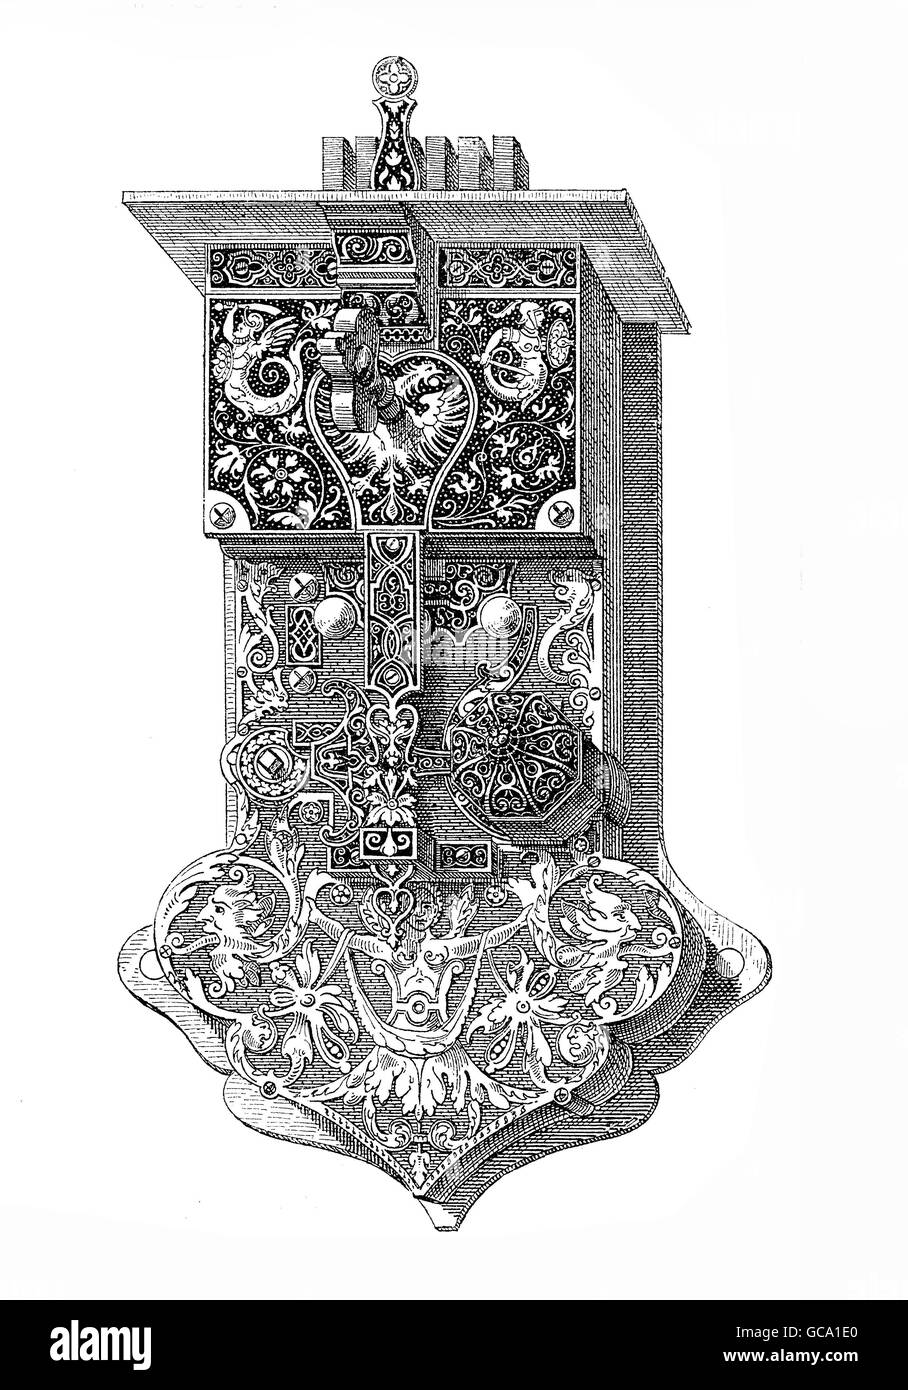 Massive doorlock engraved with floral motives. Exact date unknown, probably late XVI century. Upon key and knob size it may be inferred that it was meant for a somewhat huge and robust door. Stock Photo